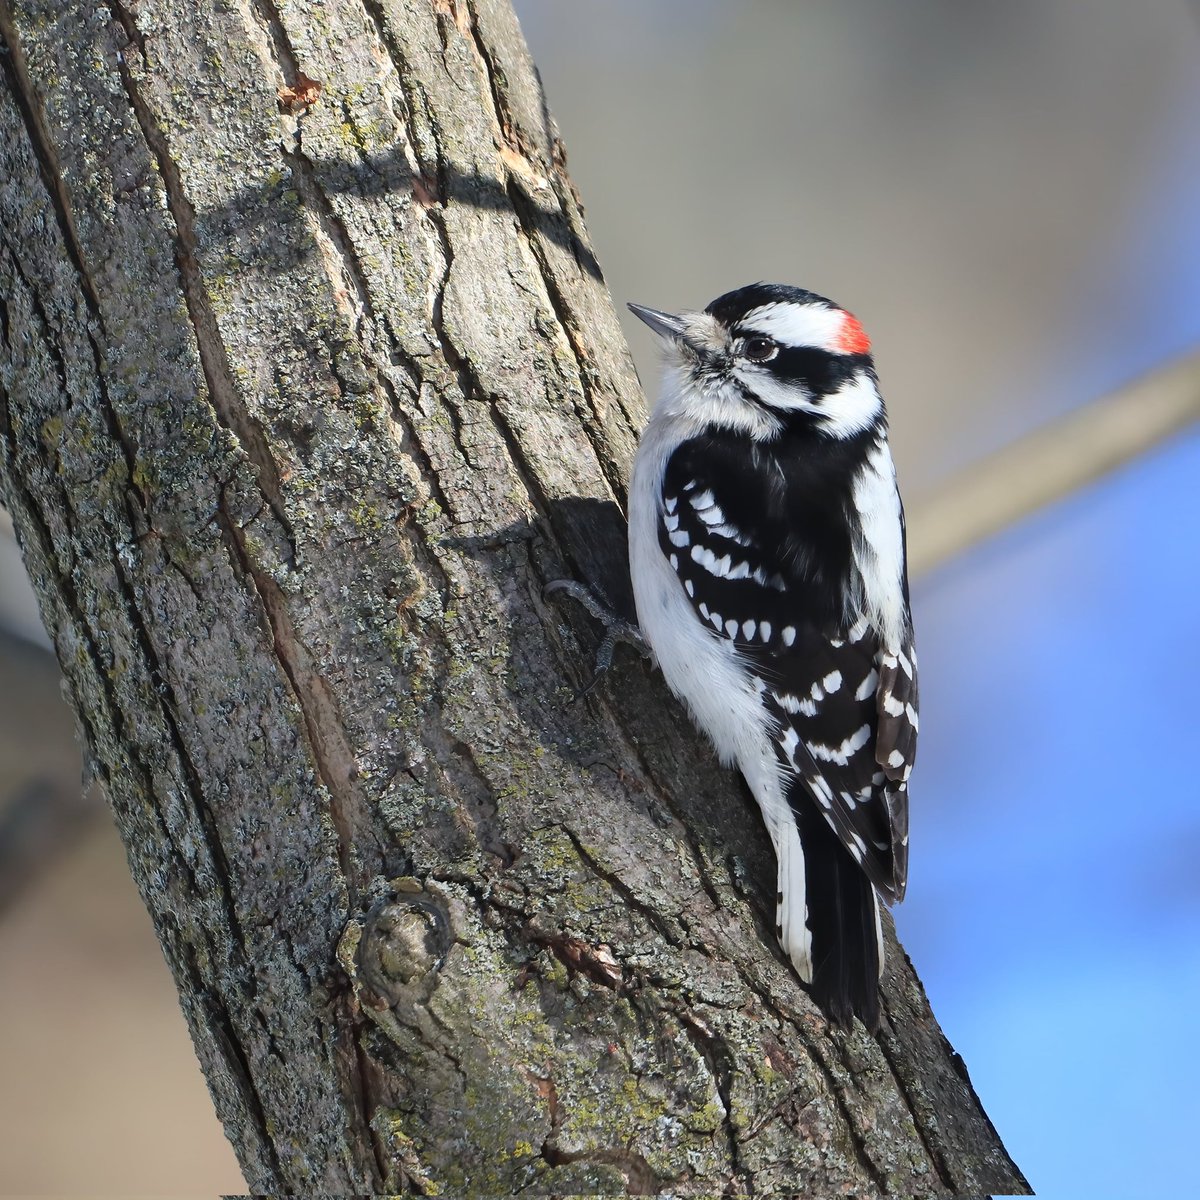 Our little downy woodpeckers are the friendliest woodpeckers!
#maledownywoodpeckers #maledownywoodpecker #downywoodpeckers #downywoodpecker #birds #woodpecker #woodpeckers #ohiobirding #friendly #beavercreekohio #birdlove #beavercreekbirding #birding #ohiobirdworld #birdwatchers